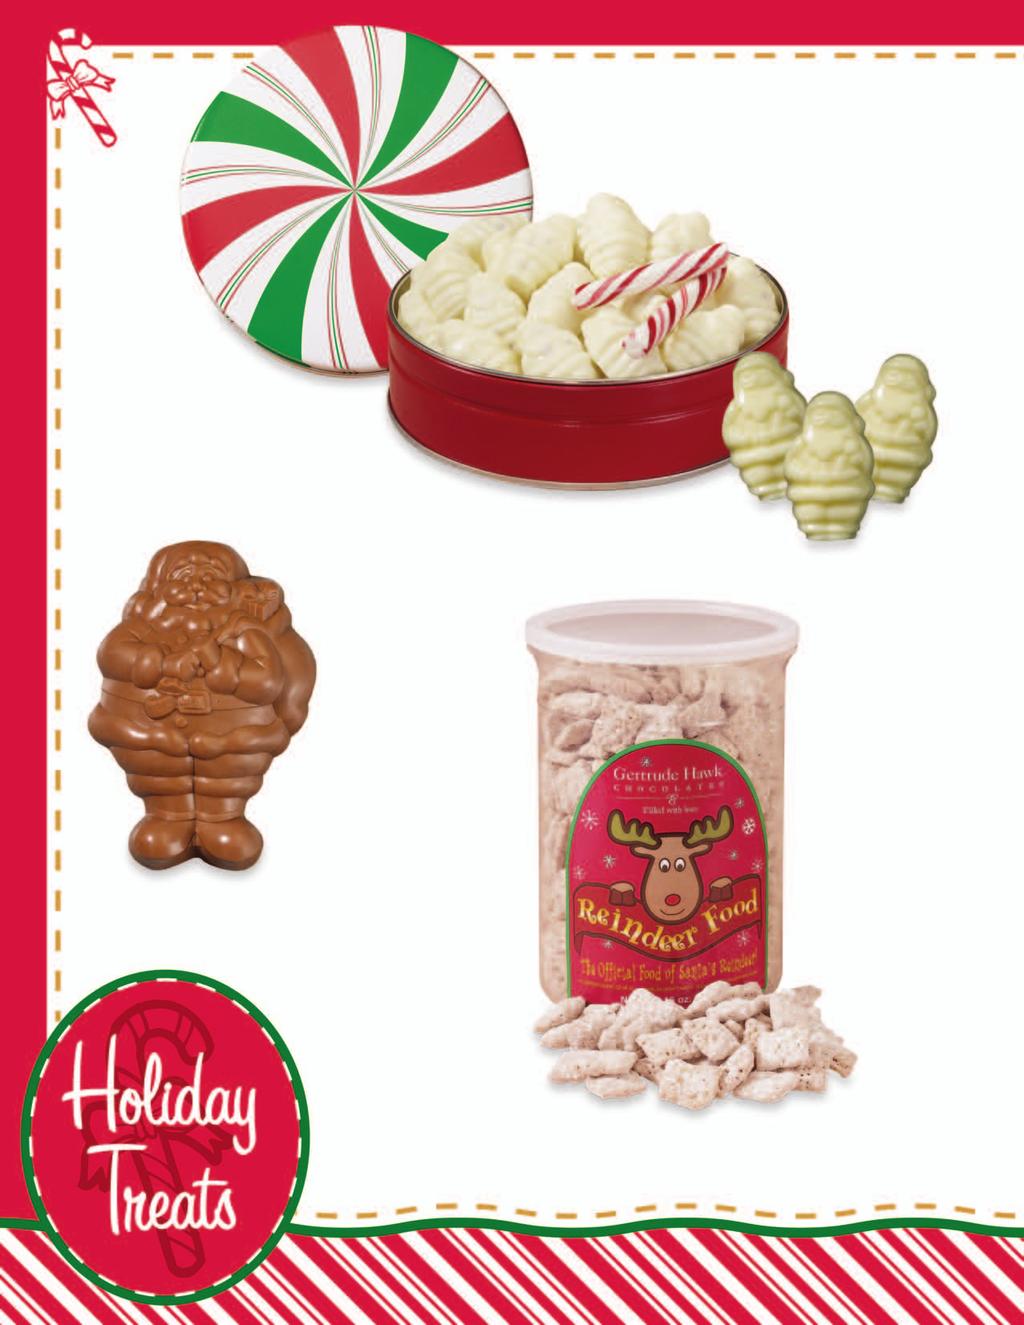 1 Candy Cane Smidgens Papá Noel con dulces de menta Smooth white chocolate filled with a refreshing mint center and crunchy candy cane pieces. Gathered in a peppermint candy themed tin. 7 oz.